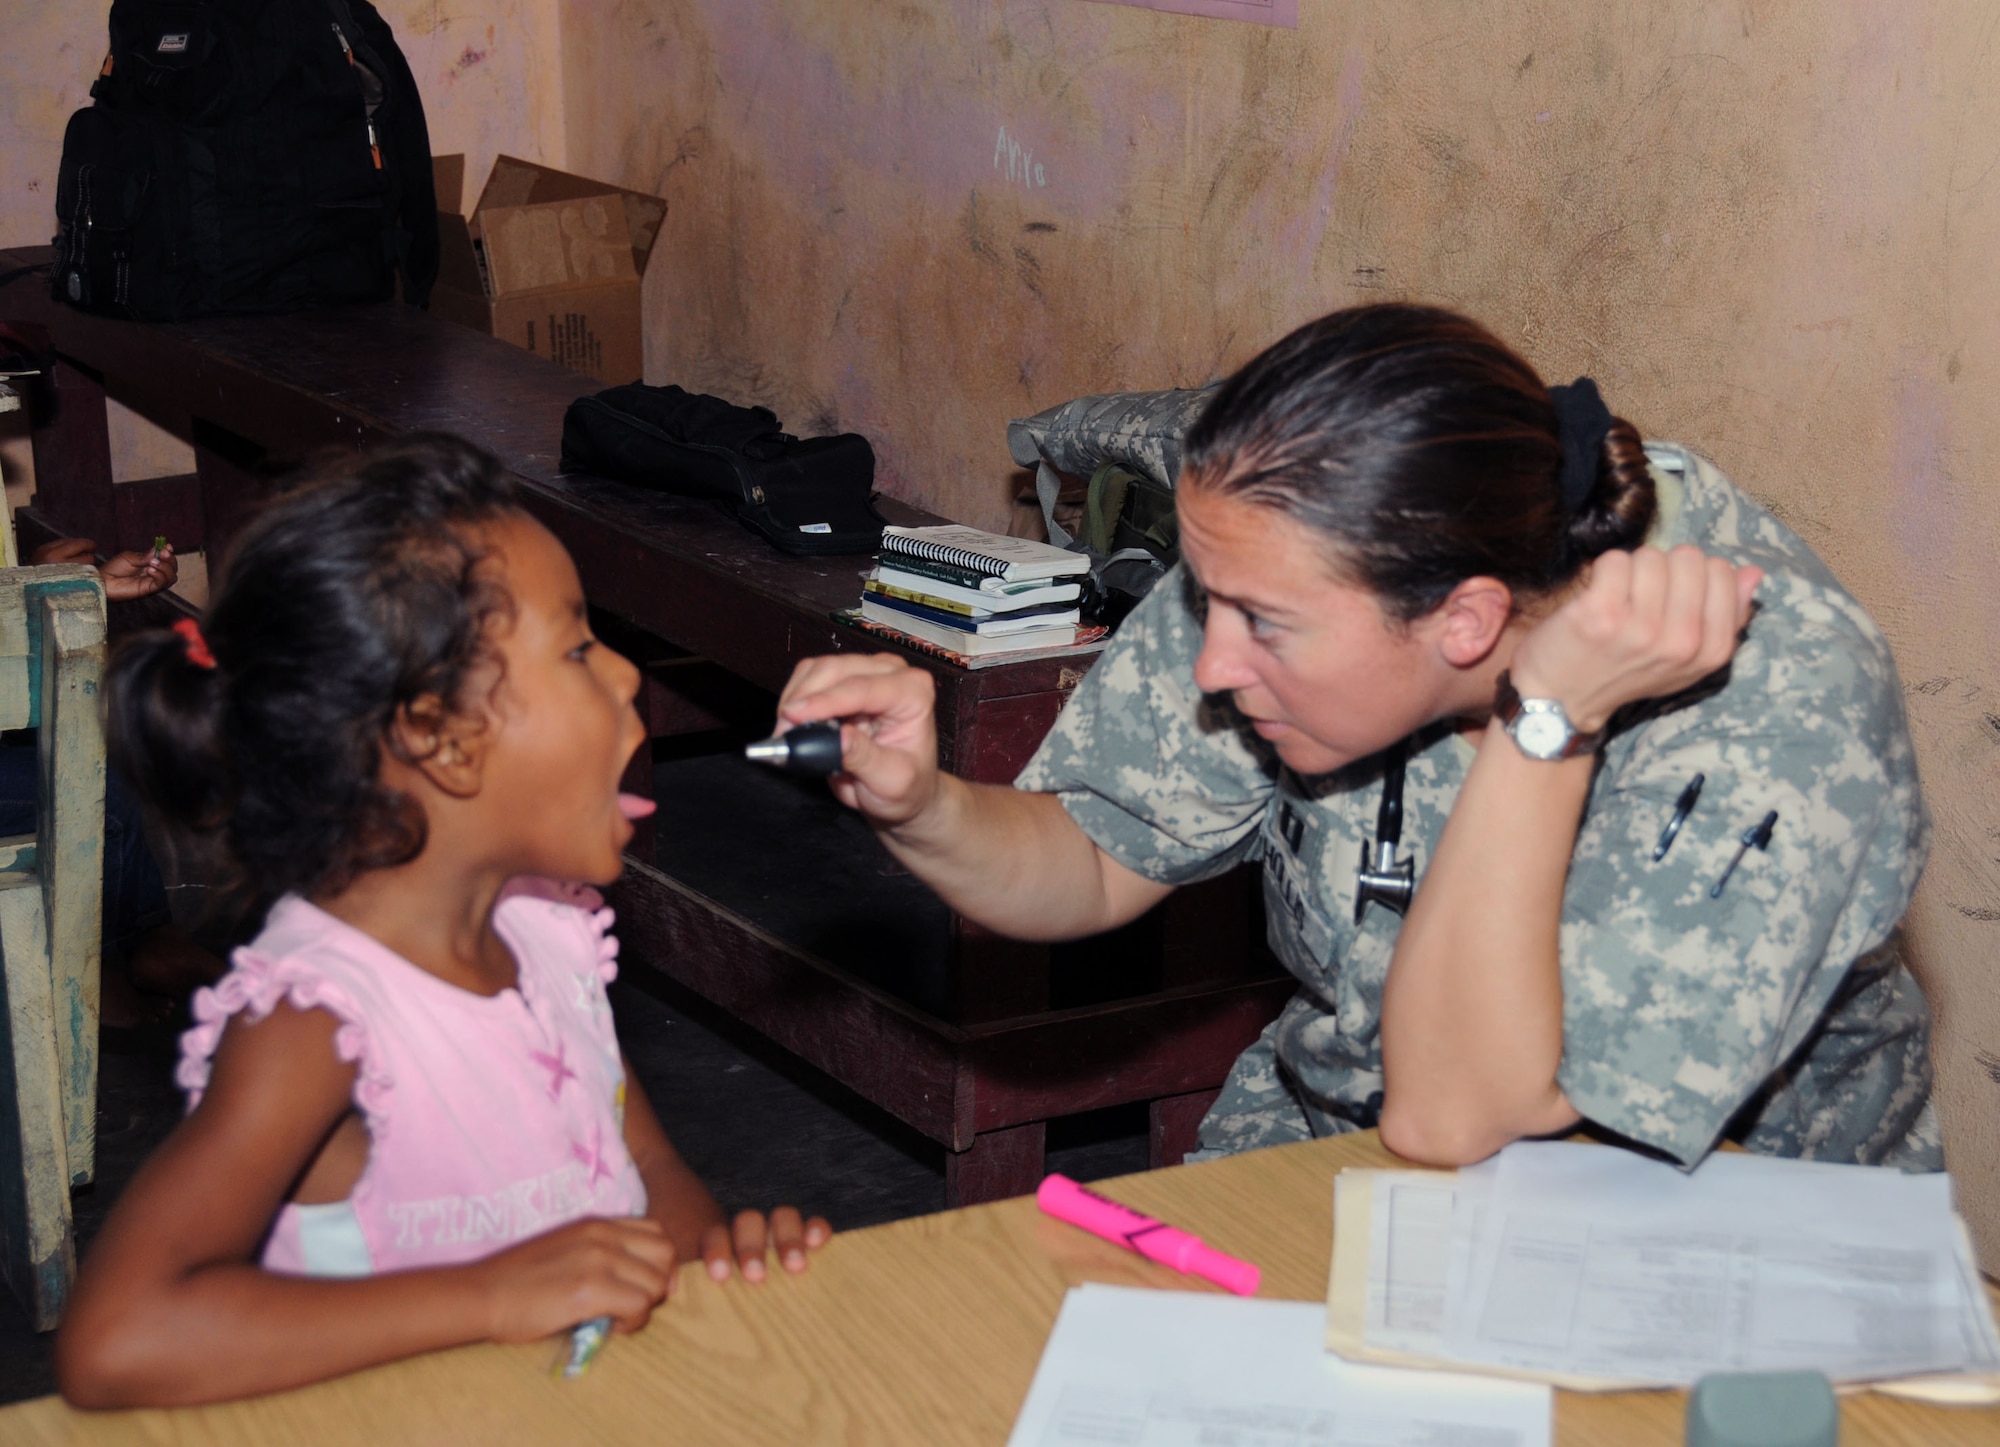 U. S. Army Capt. Emily Hollis examines a Honduran child during a MEDRETE.  Joint Task Force -Bravo's Medical Element (MEDEL), with support from 1-228th Aviation Regiment, JTF-Bravo Joint Security Forces and Army Forces Battalion, partnered with the Honduras Ministry of Health and the Honduran military to provide medical care to more than 650 people in the remote village of Barra Patuca in the Department of Gracias a Dios, Honduras, during a Medical Readiness Training Exercise (MEDRETE), July 17, 2014.  The multi-national team worked together to provide preventative medicine to the villagers, including classes on hygiene, preventative dental care, and nutrition. They also provided immunizations to infants, dental care, wellness checkups, medications, and minor medical procedures.  (Photo by U. S. Air National Guard Capt. Steven Stubbs)